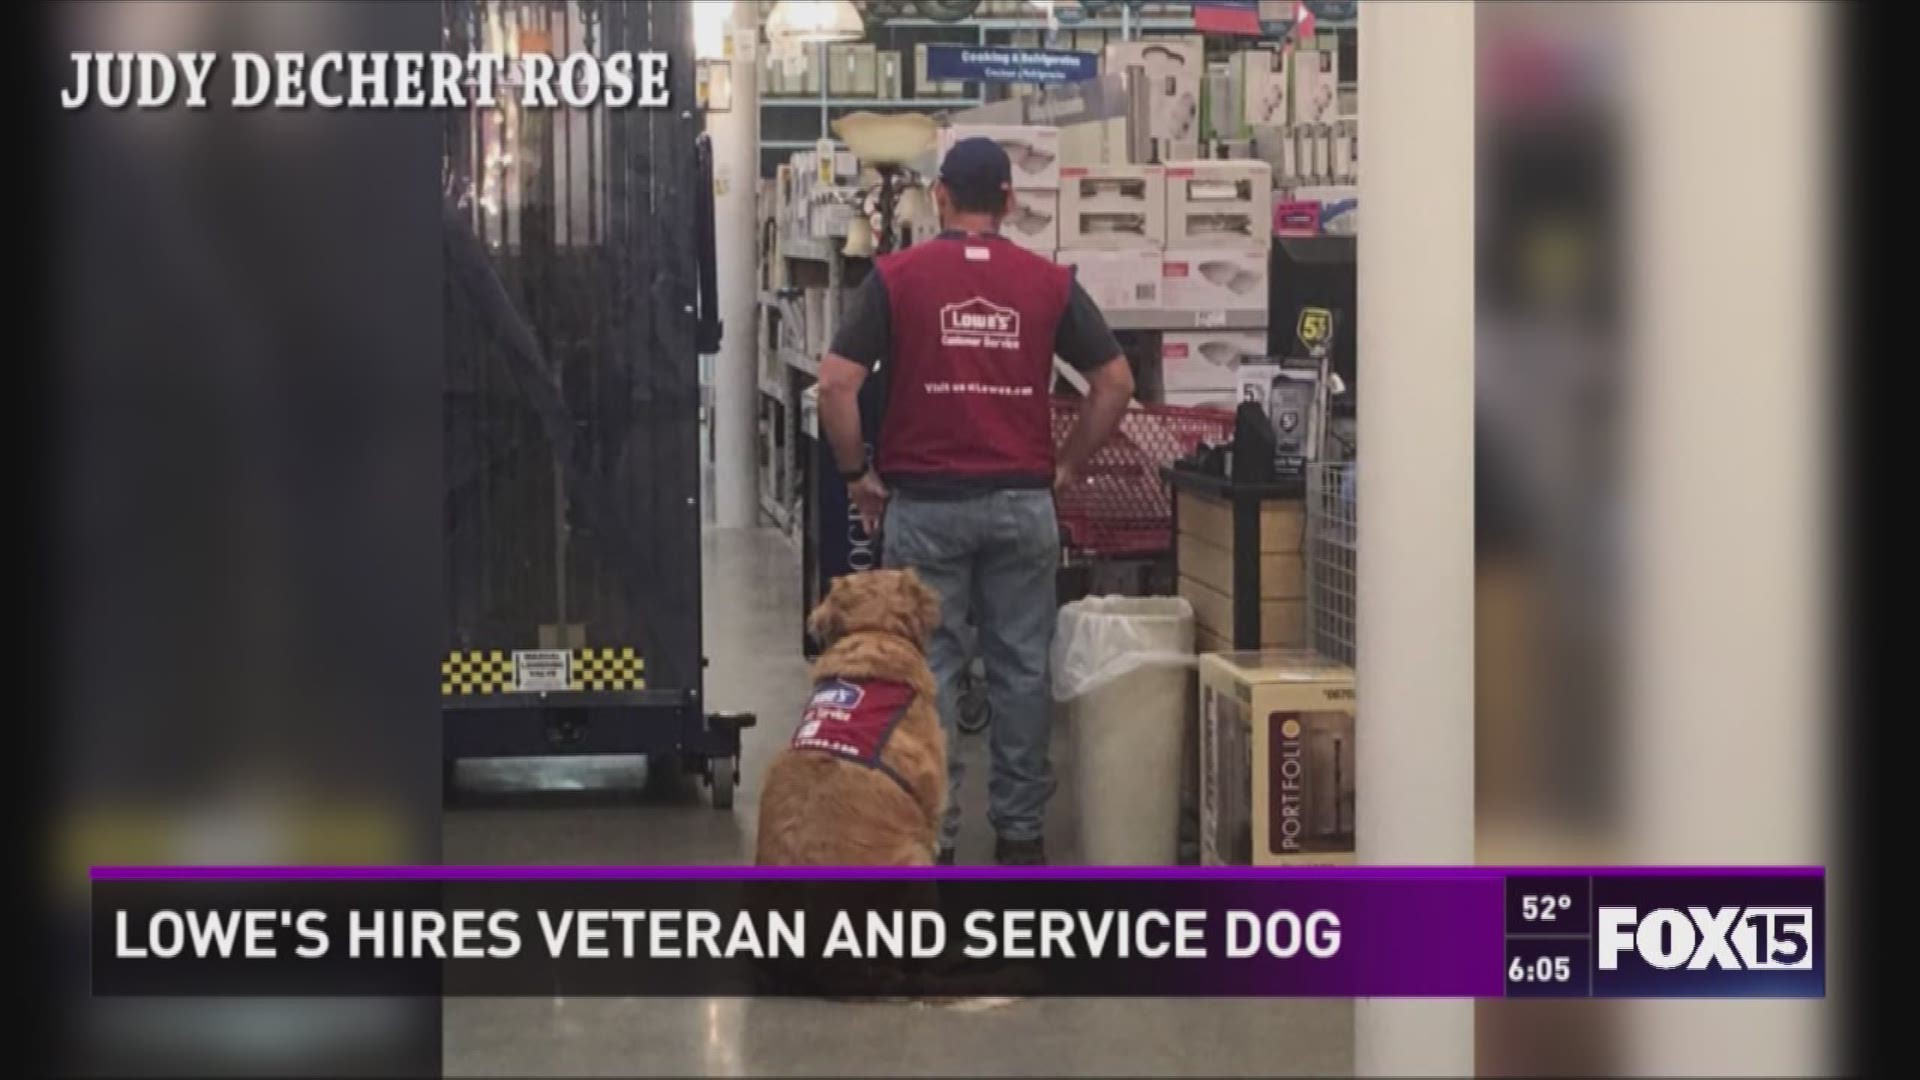 An Abilene home improvement store has two new employees: one with two legs, another with four.